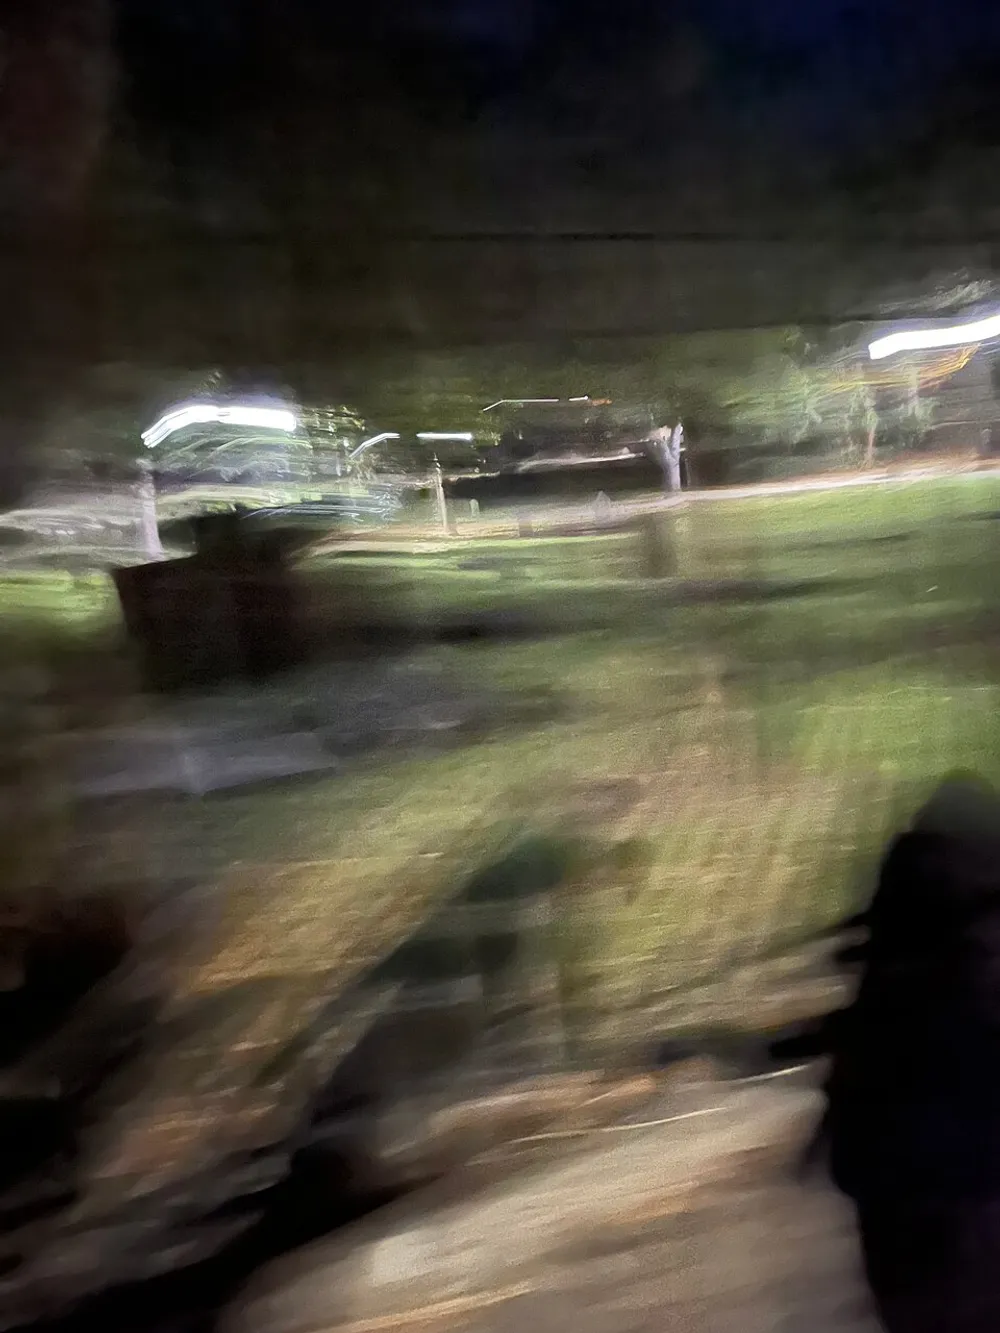 The image is a blurred nighttime scene possibly taken while in motion featuring distorted lights and unidentifiable shapes that suggests movement